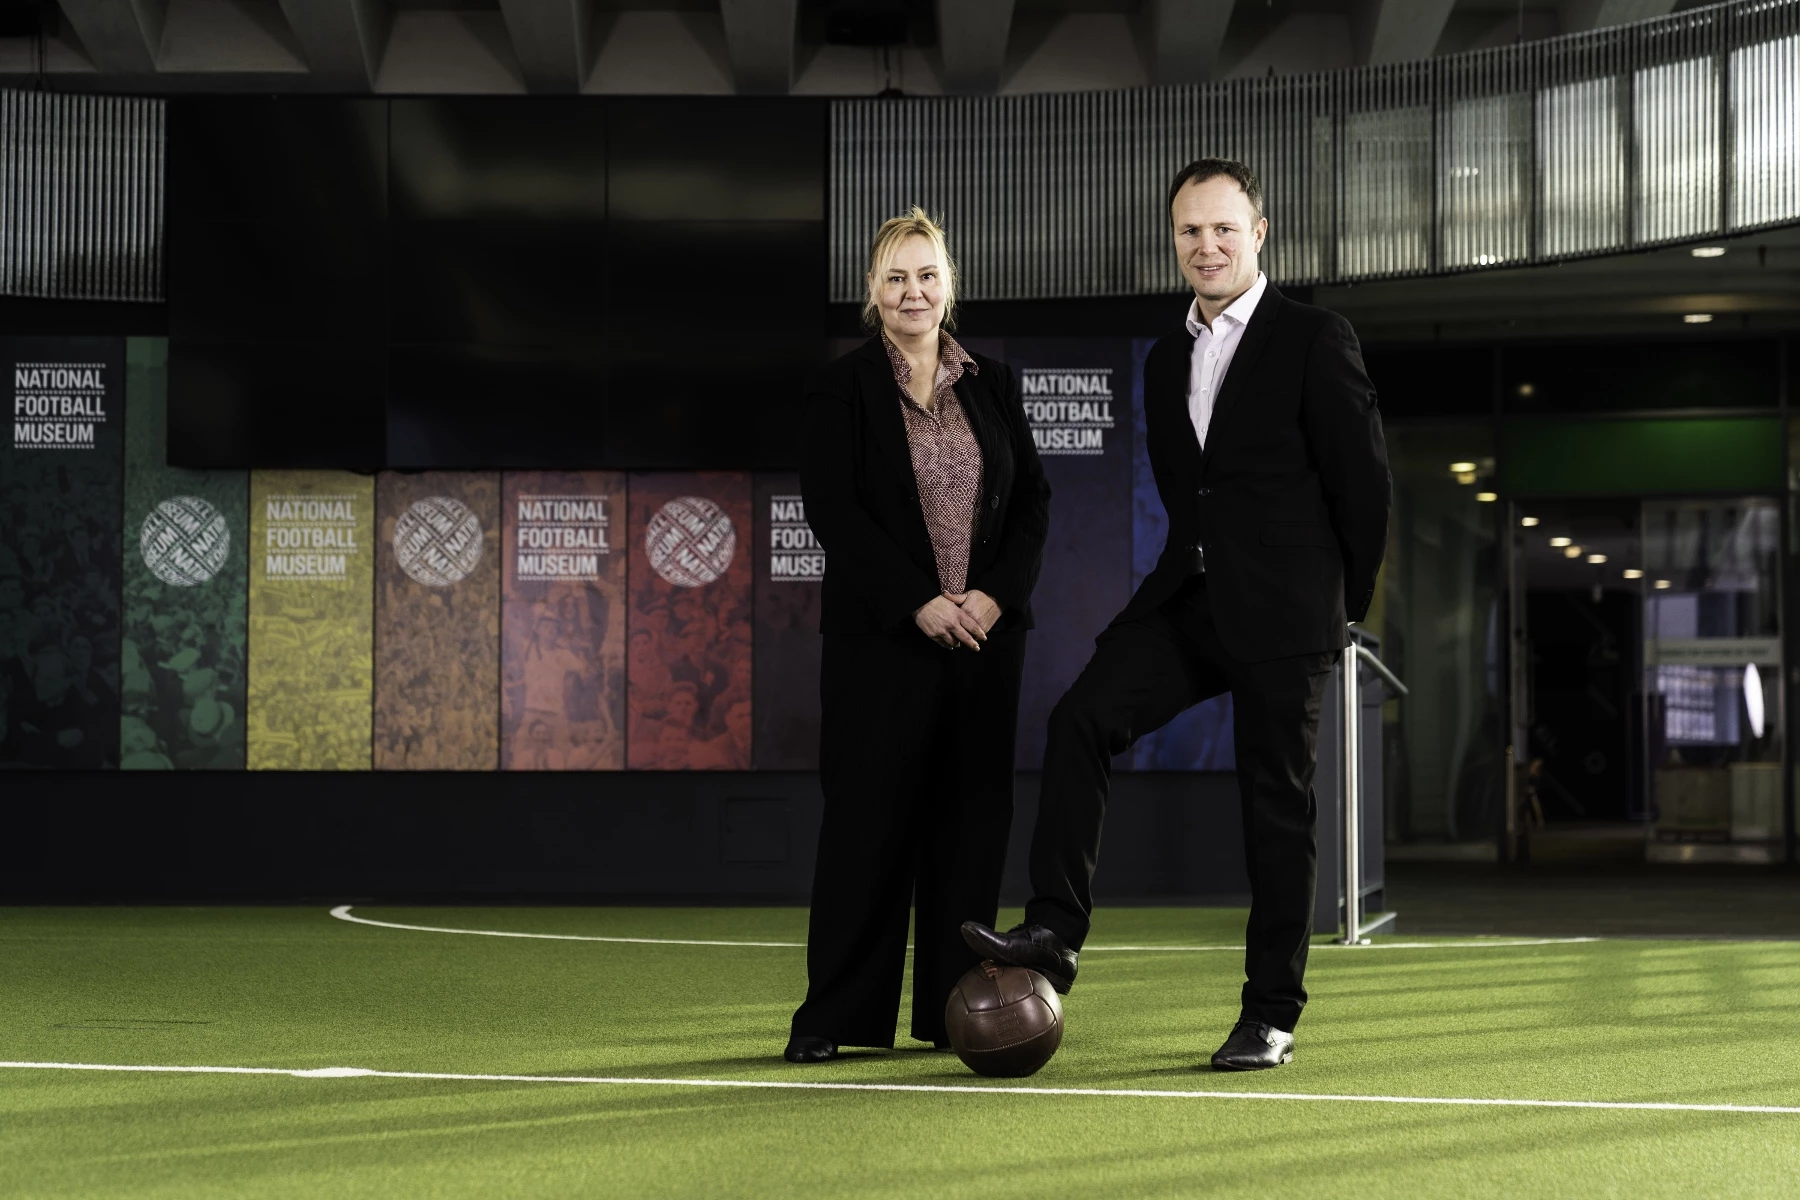 Helen Besant-Roberts and Greg Wilson at the National Football Museum